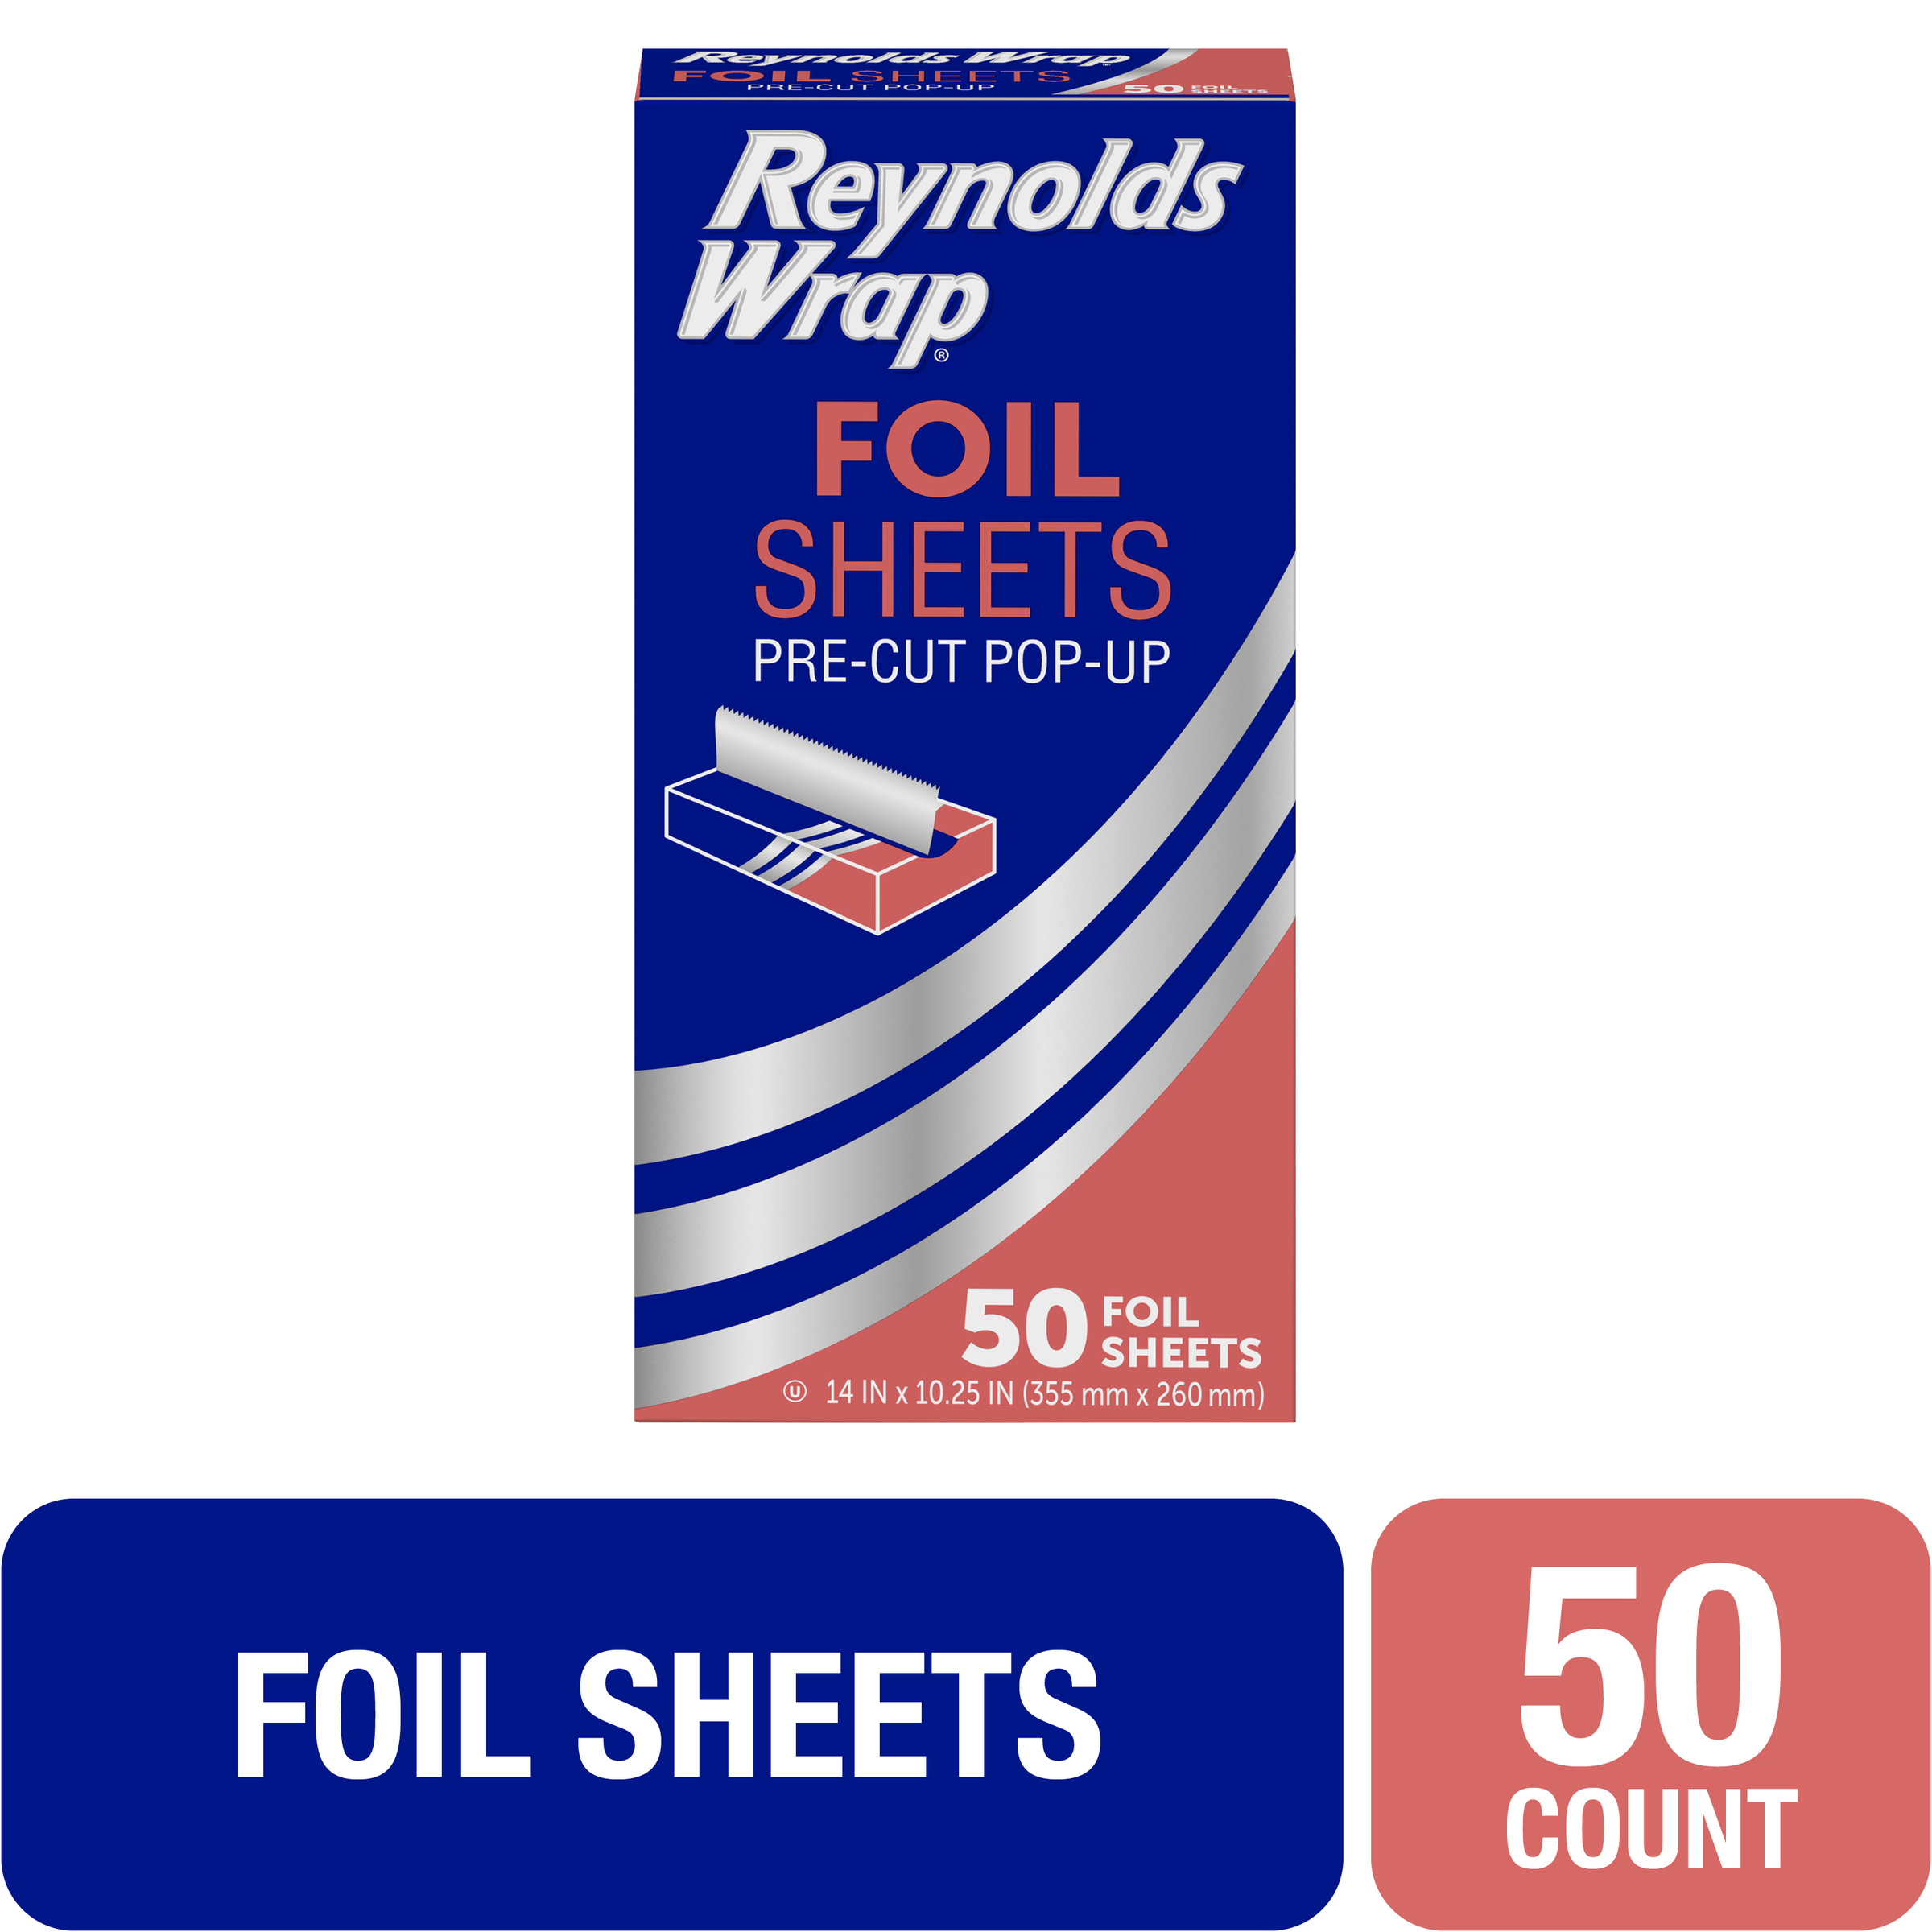 Reynolds Wrap Pre-Cut Aluminum Foil Sheets, 14x10.25 Inches, 50 Sheets - image 1 of 7